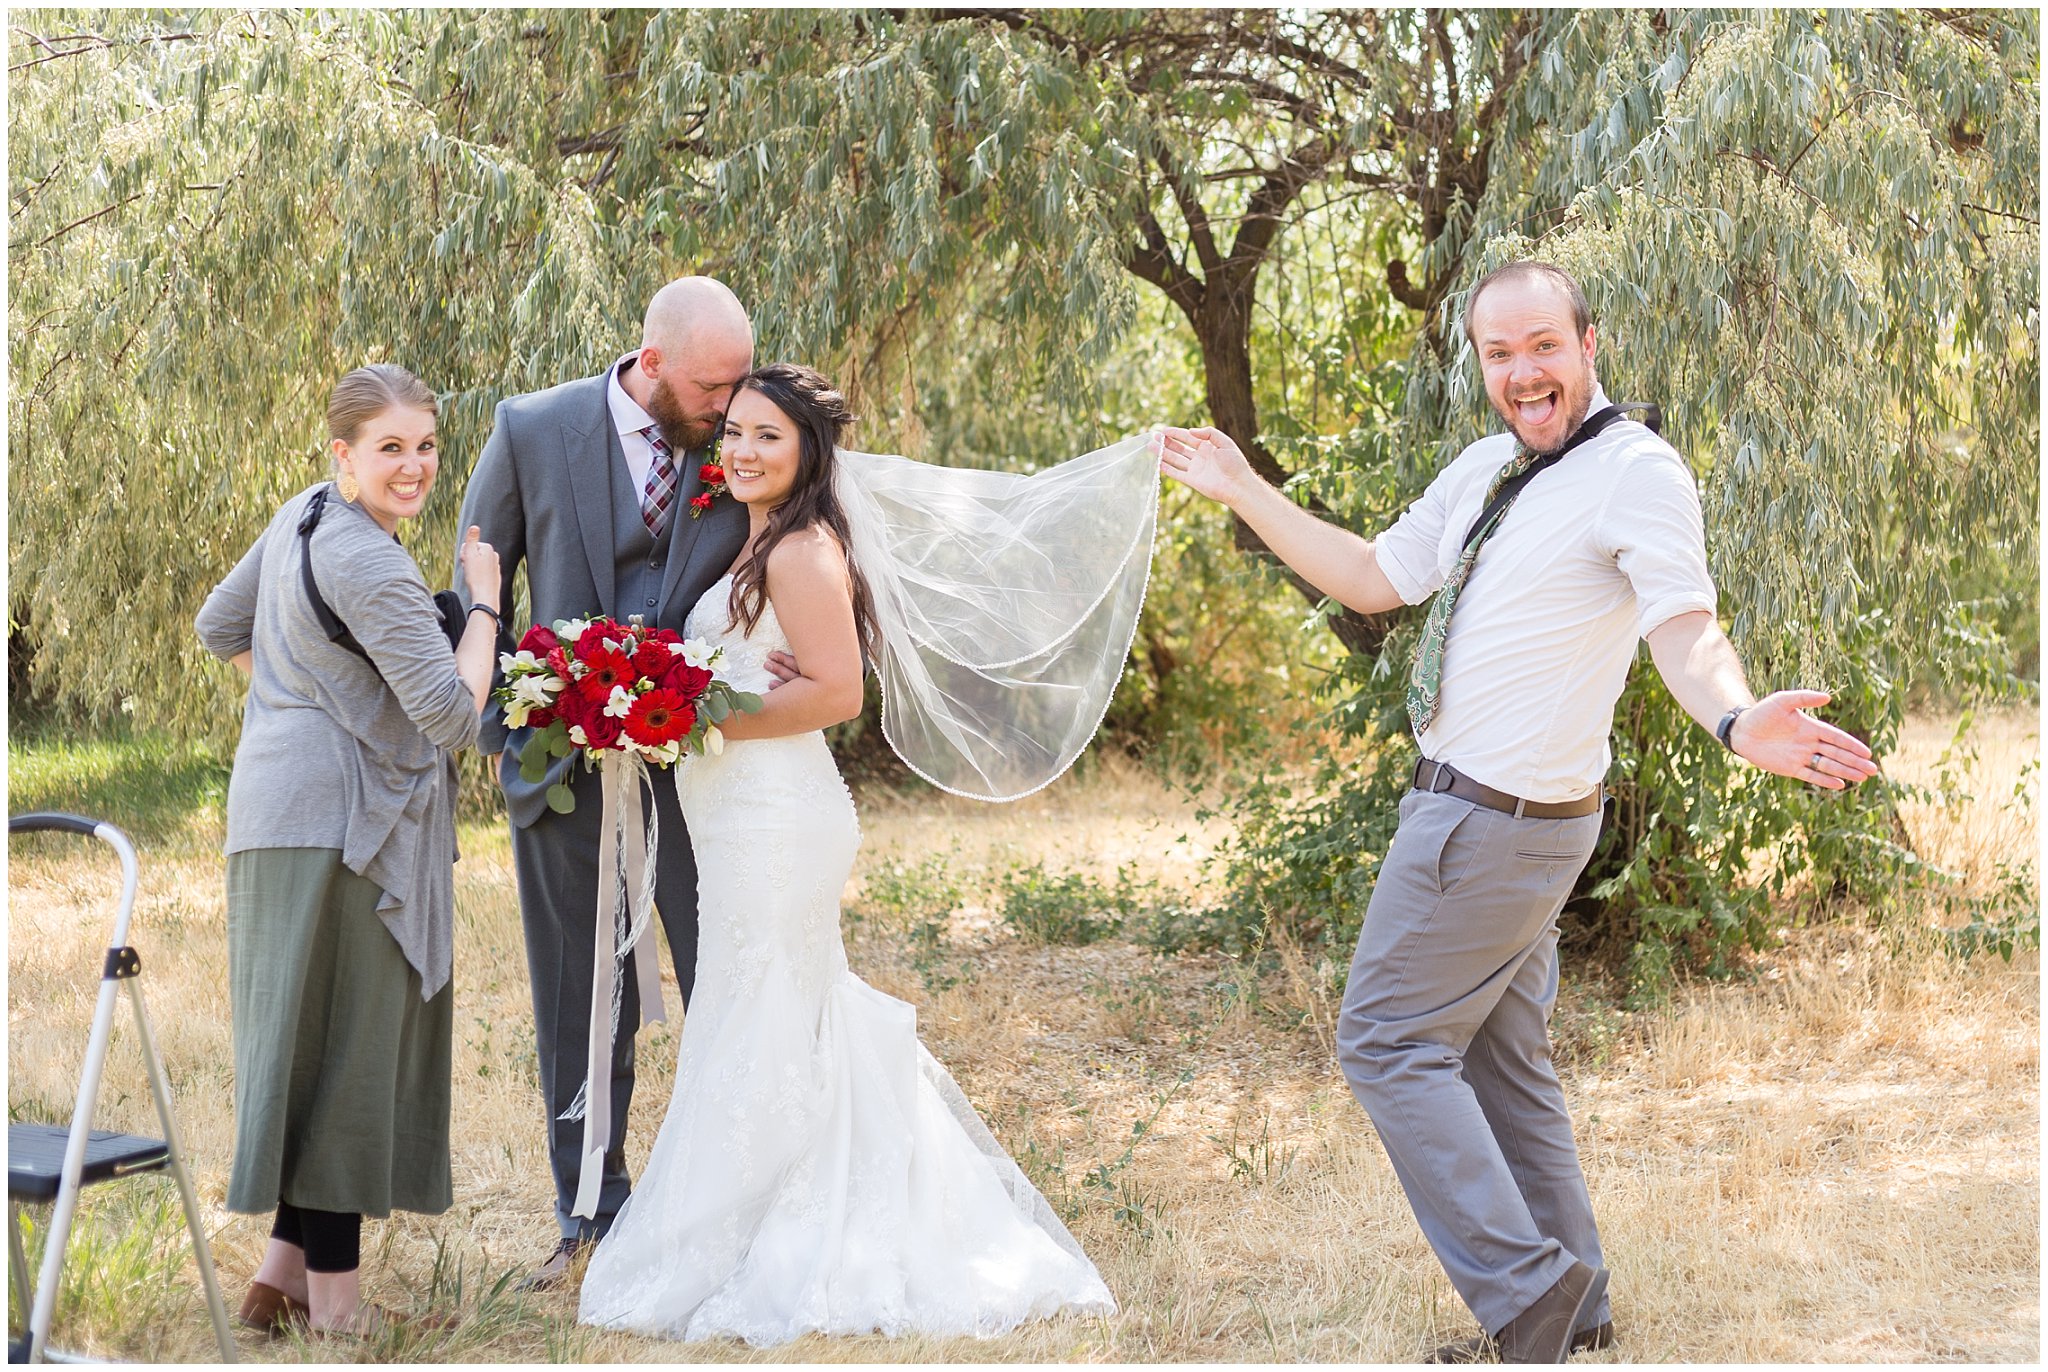 Utah Photographers with bride and groom during outdoor wedding | Husband and Wife Photography Team | Jessie and Dallin Photography